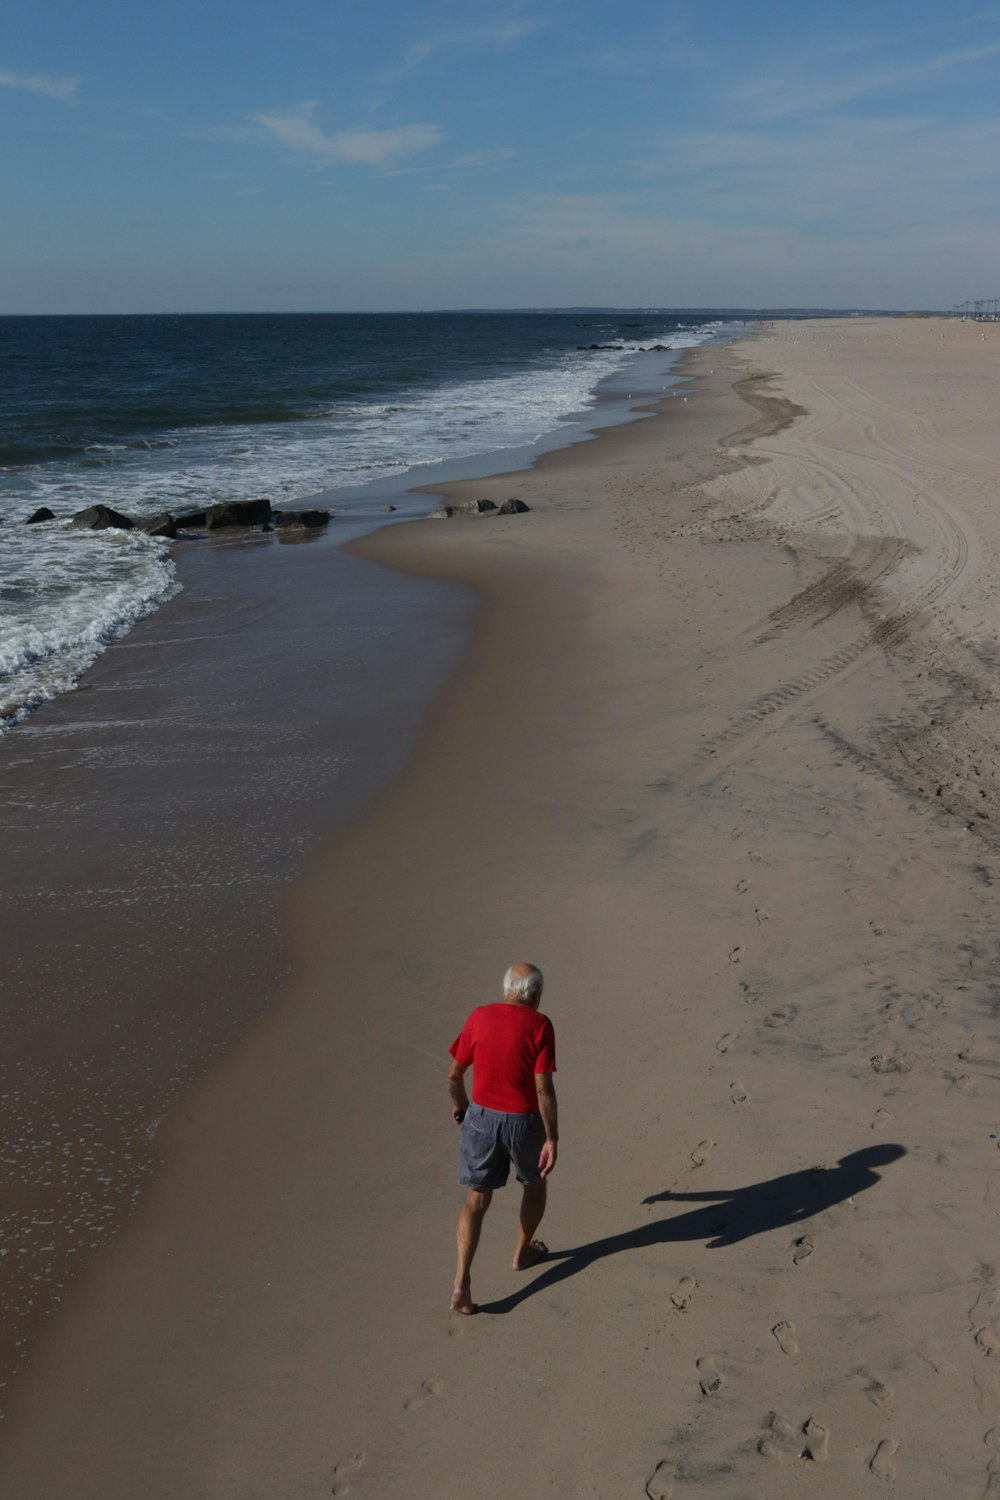 a man in a red shirt is walking on the beach